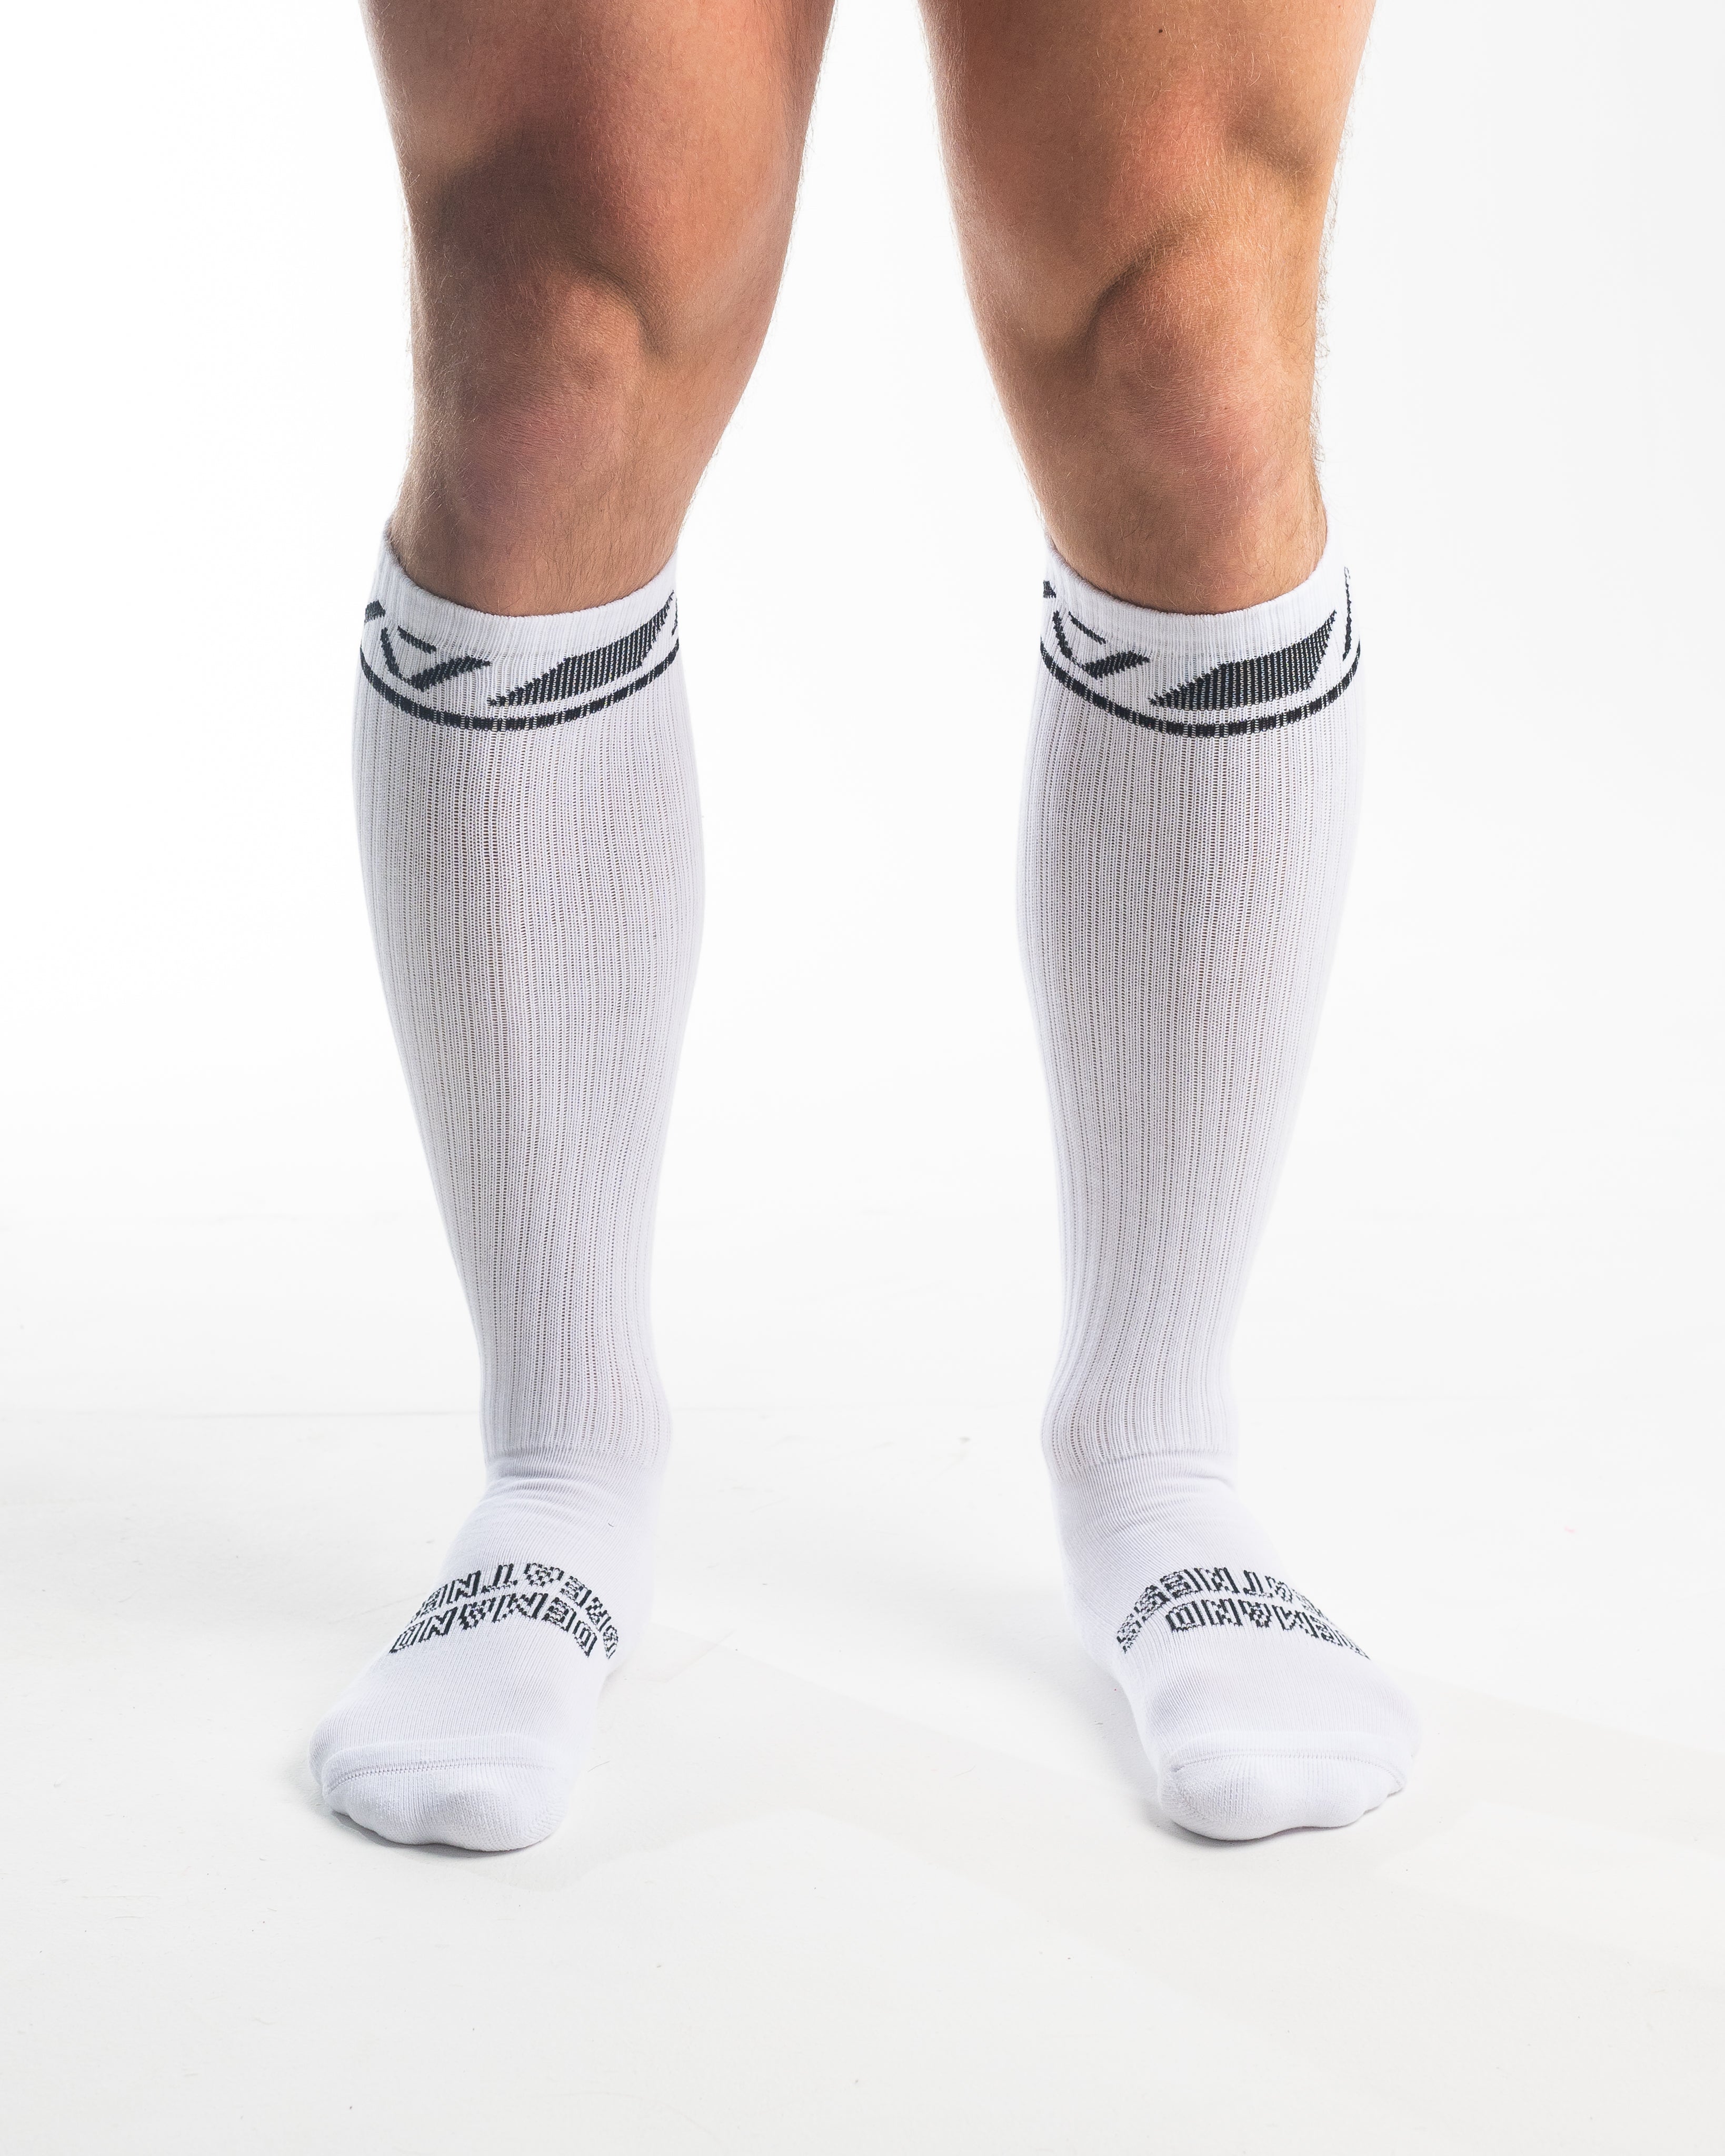 A7 Domino Deadlift socks are designed specifically for pulls and keep your shins protected from scrapes. A7 deadlift socks are a perfect pair to wear in training or powerlifting competition. The IPF Approved Kit includes Powerlifting Singlet, A7 Meet Shirt, A7 Zebra Wrist Wraps, A7 Deadlift Socks, Hourglass Knee Sleeves (Stiff Knee Sleeves and Rigor Mortis Knee Sleeves). All A7 Powerlifting Equipment shipping to UK, Norway, Switzerland and Iceland.